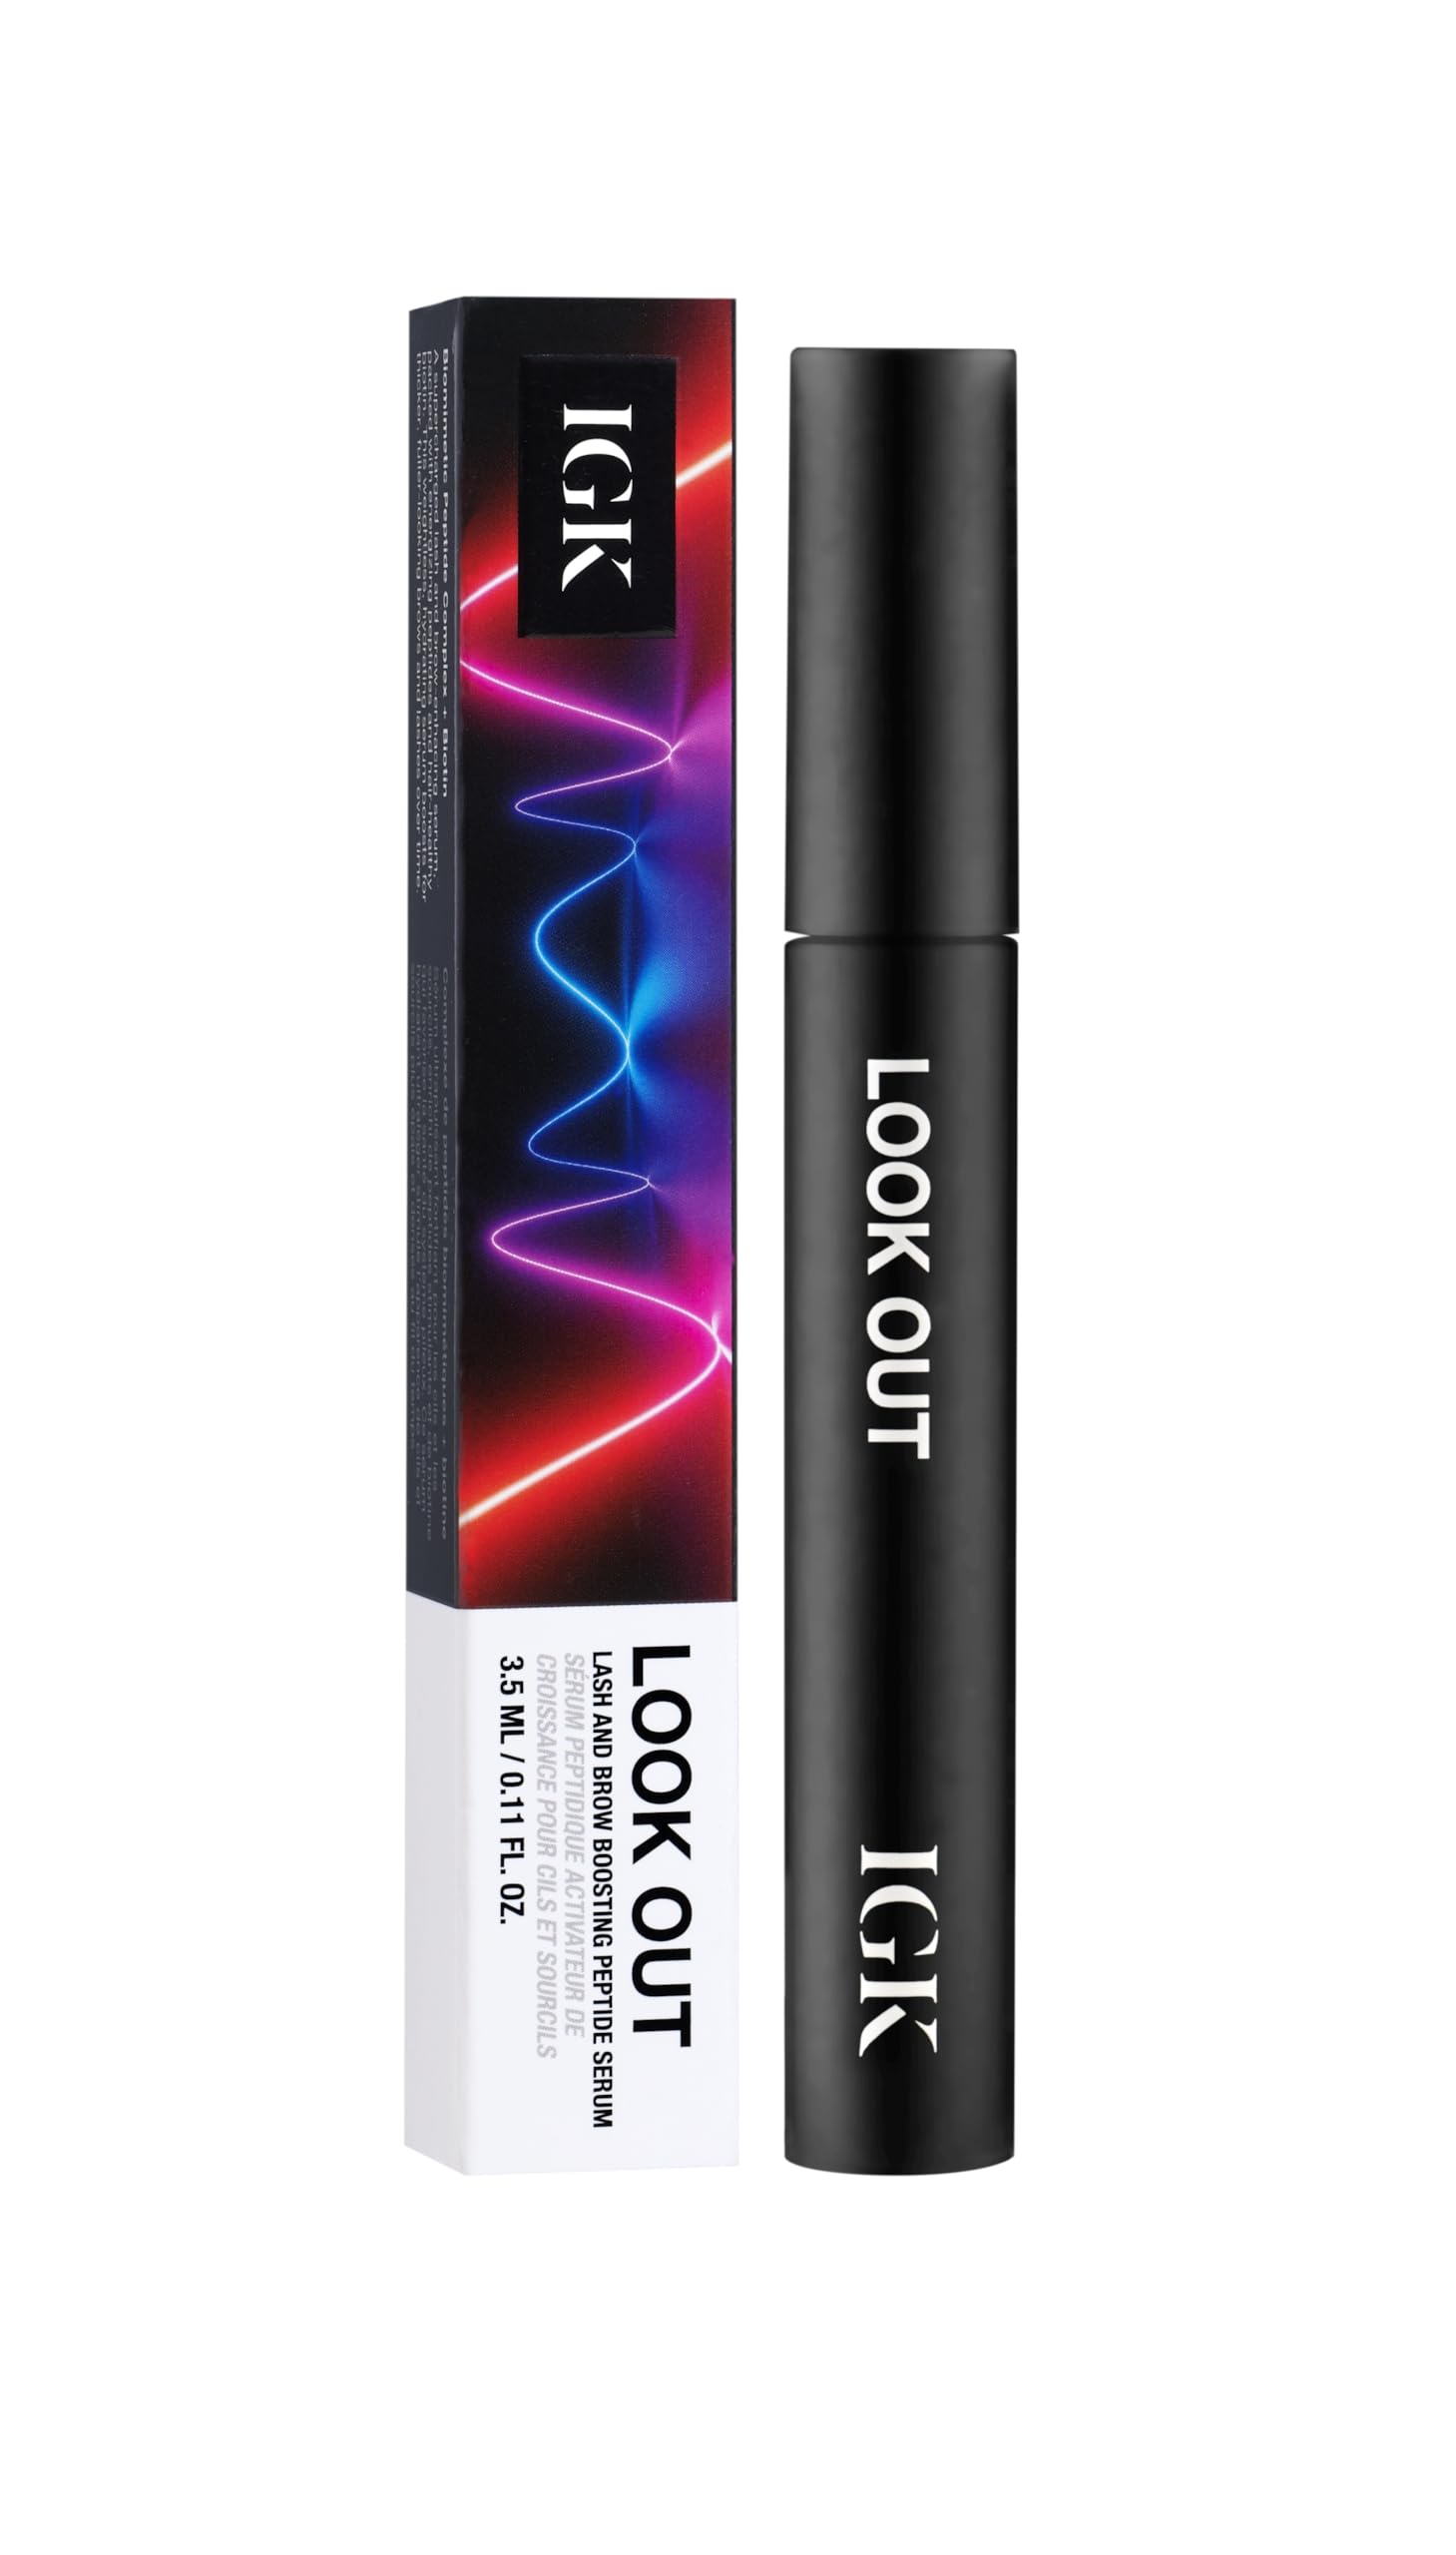 IGK Look Out Lash and Brow Boosting Peptide Serum | Increases Thickness + Fullness + Density of Brows and Lashes | Dermatologist + Ophthalmologist Approved | Vegan + Cruelty-Free | 0.11 Fl Oz